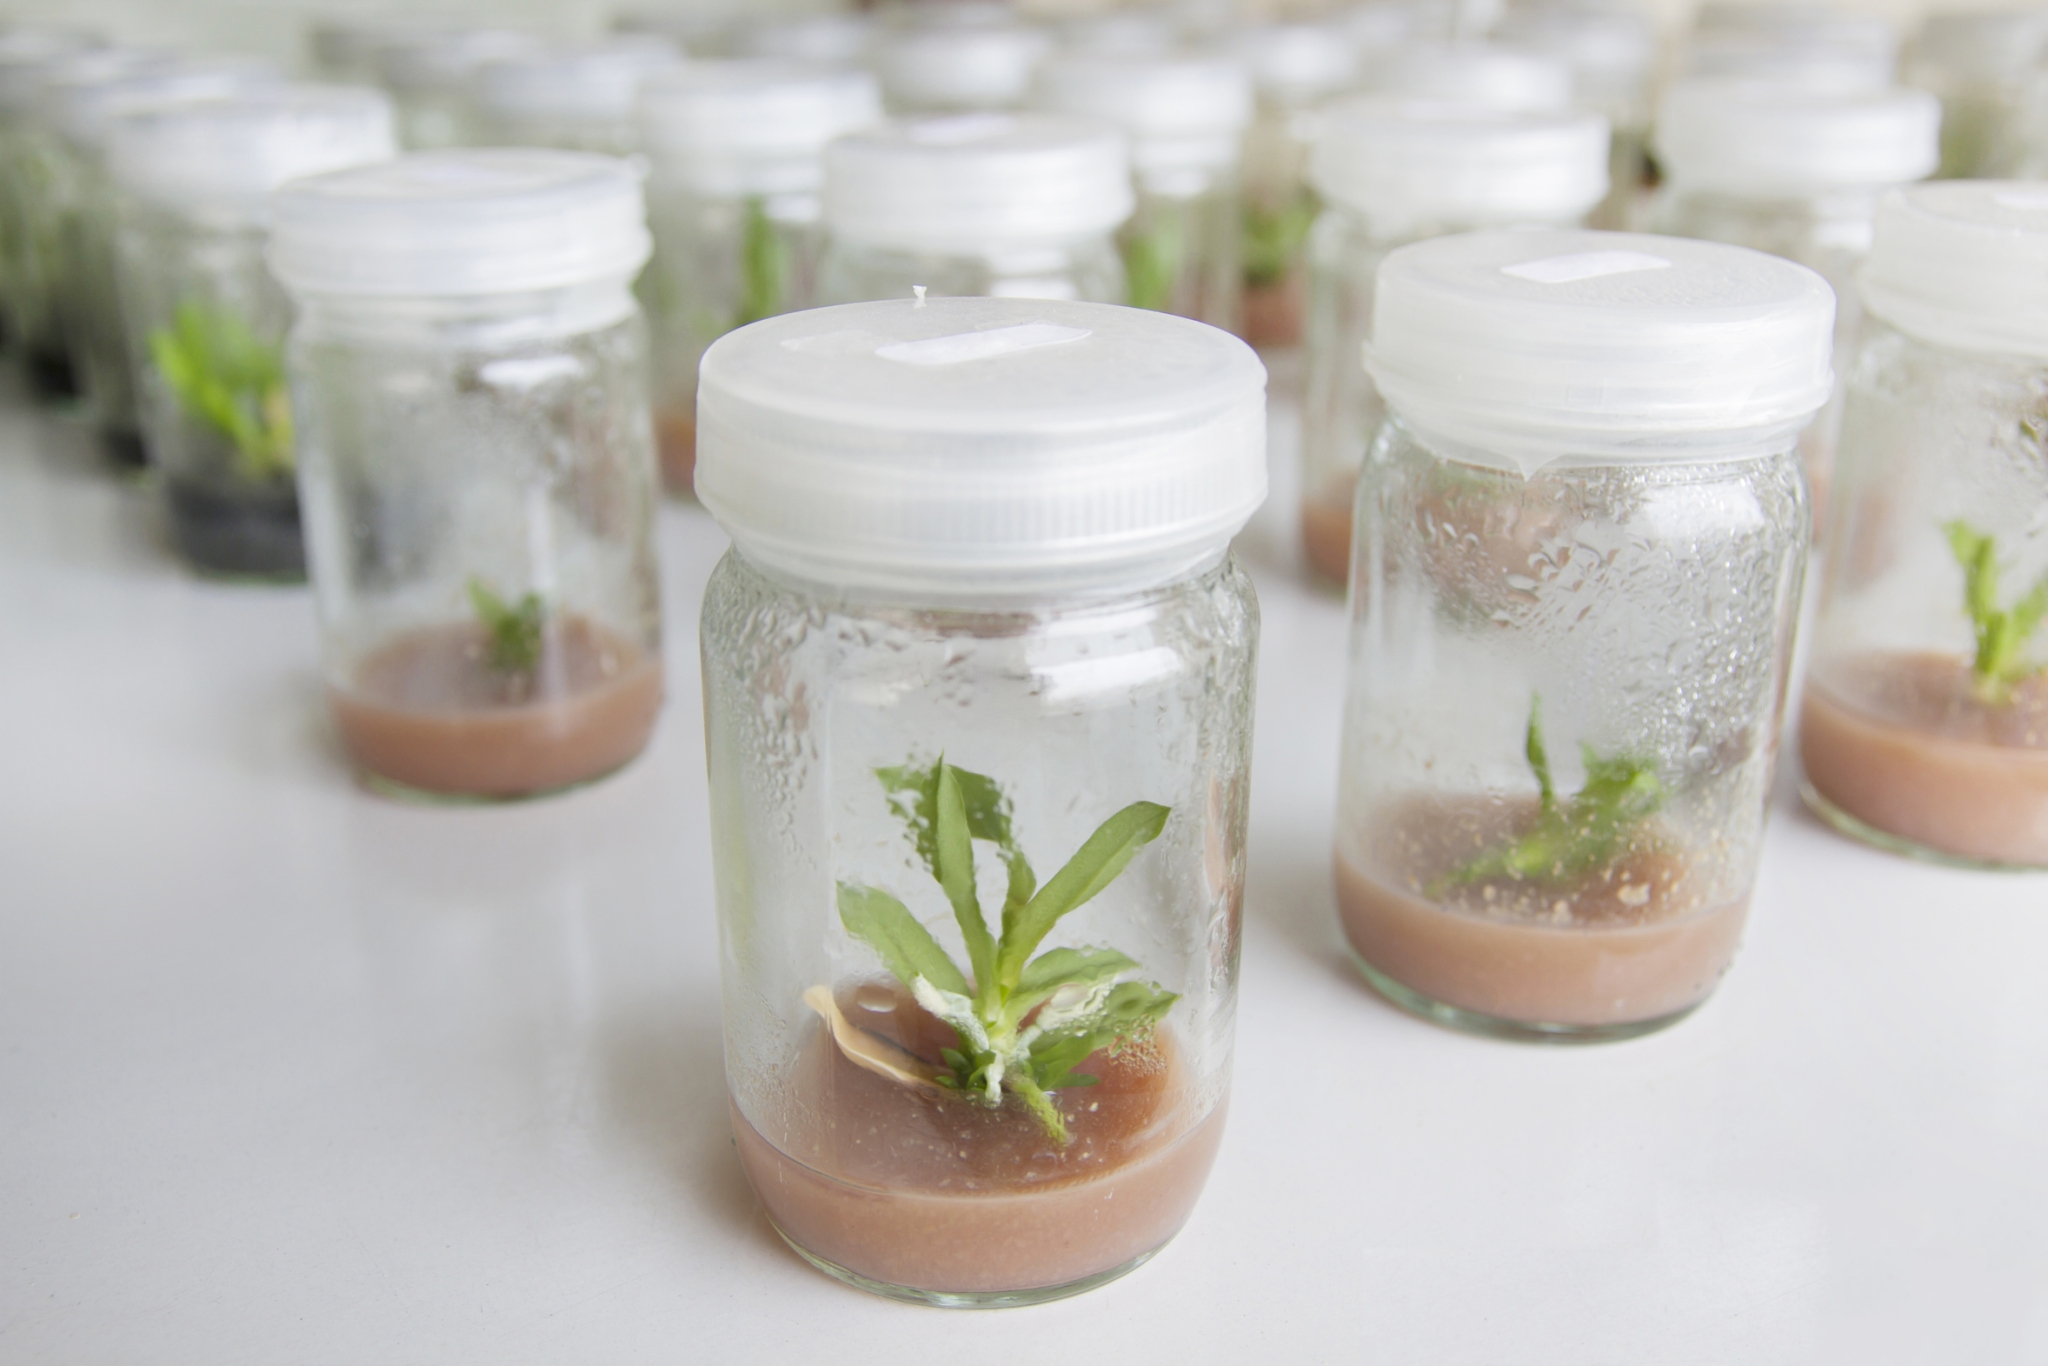 Several small glasses in which plants are grown (micropropagation). The photo symbolises the genetic modification of plants.